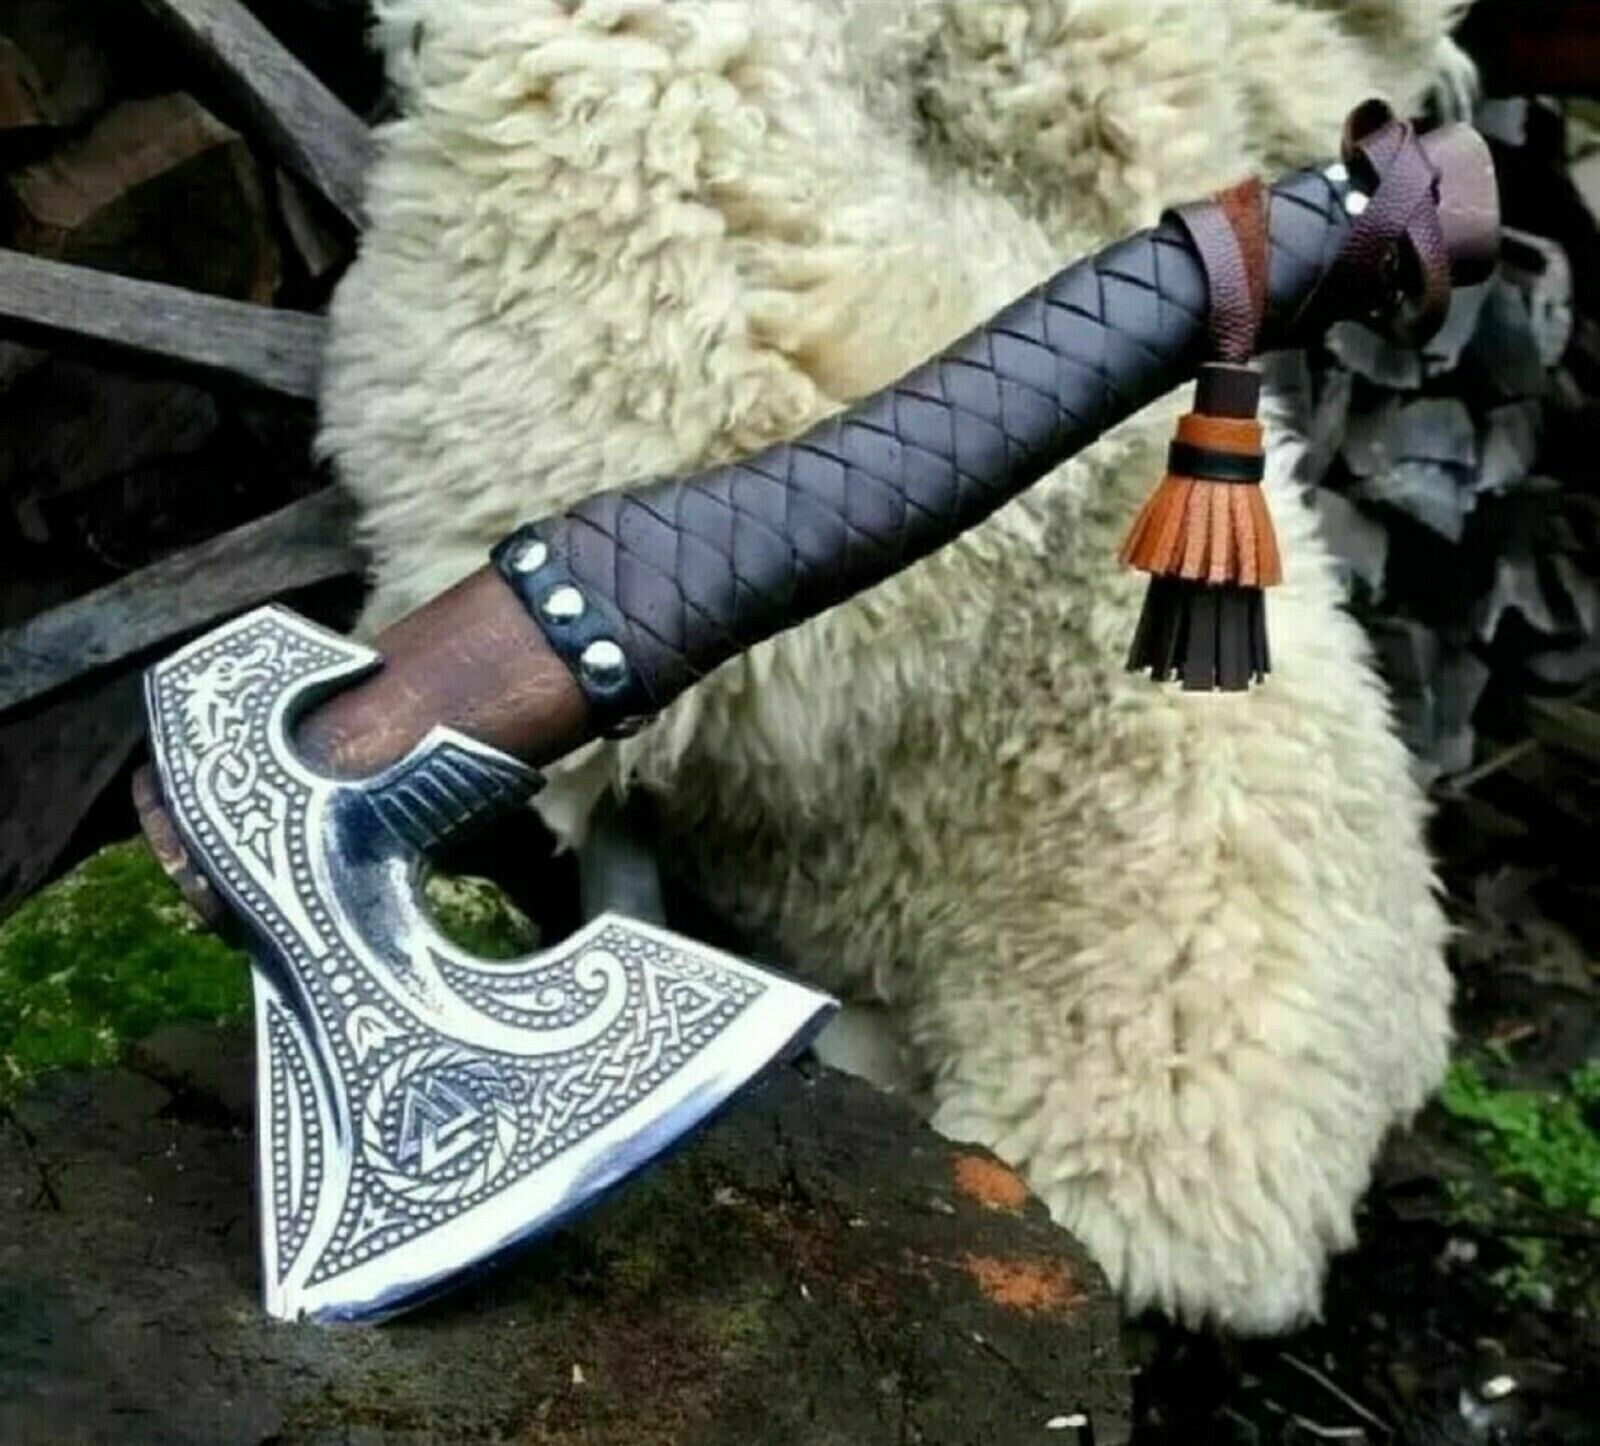 AWESOME RARE STAINLESS STEEL TOMAHAWK KNIFE, HATCHET, Viking AXE, INTEGRAL